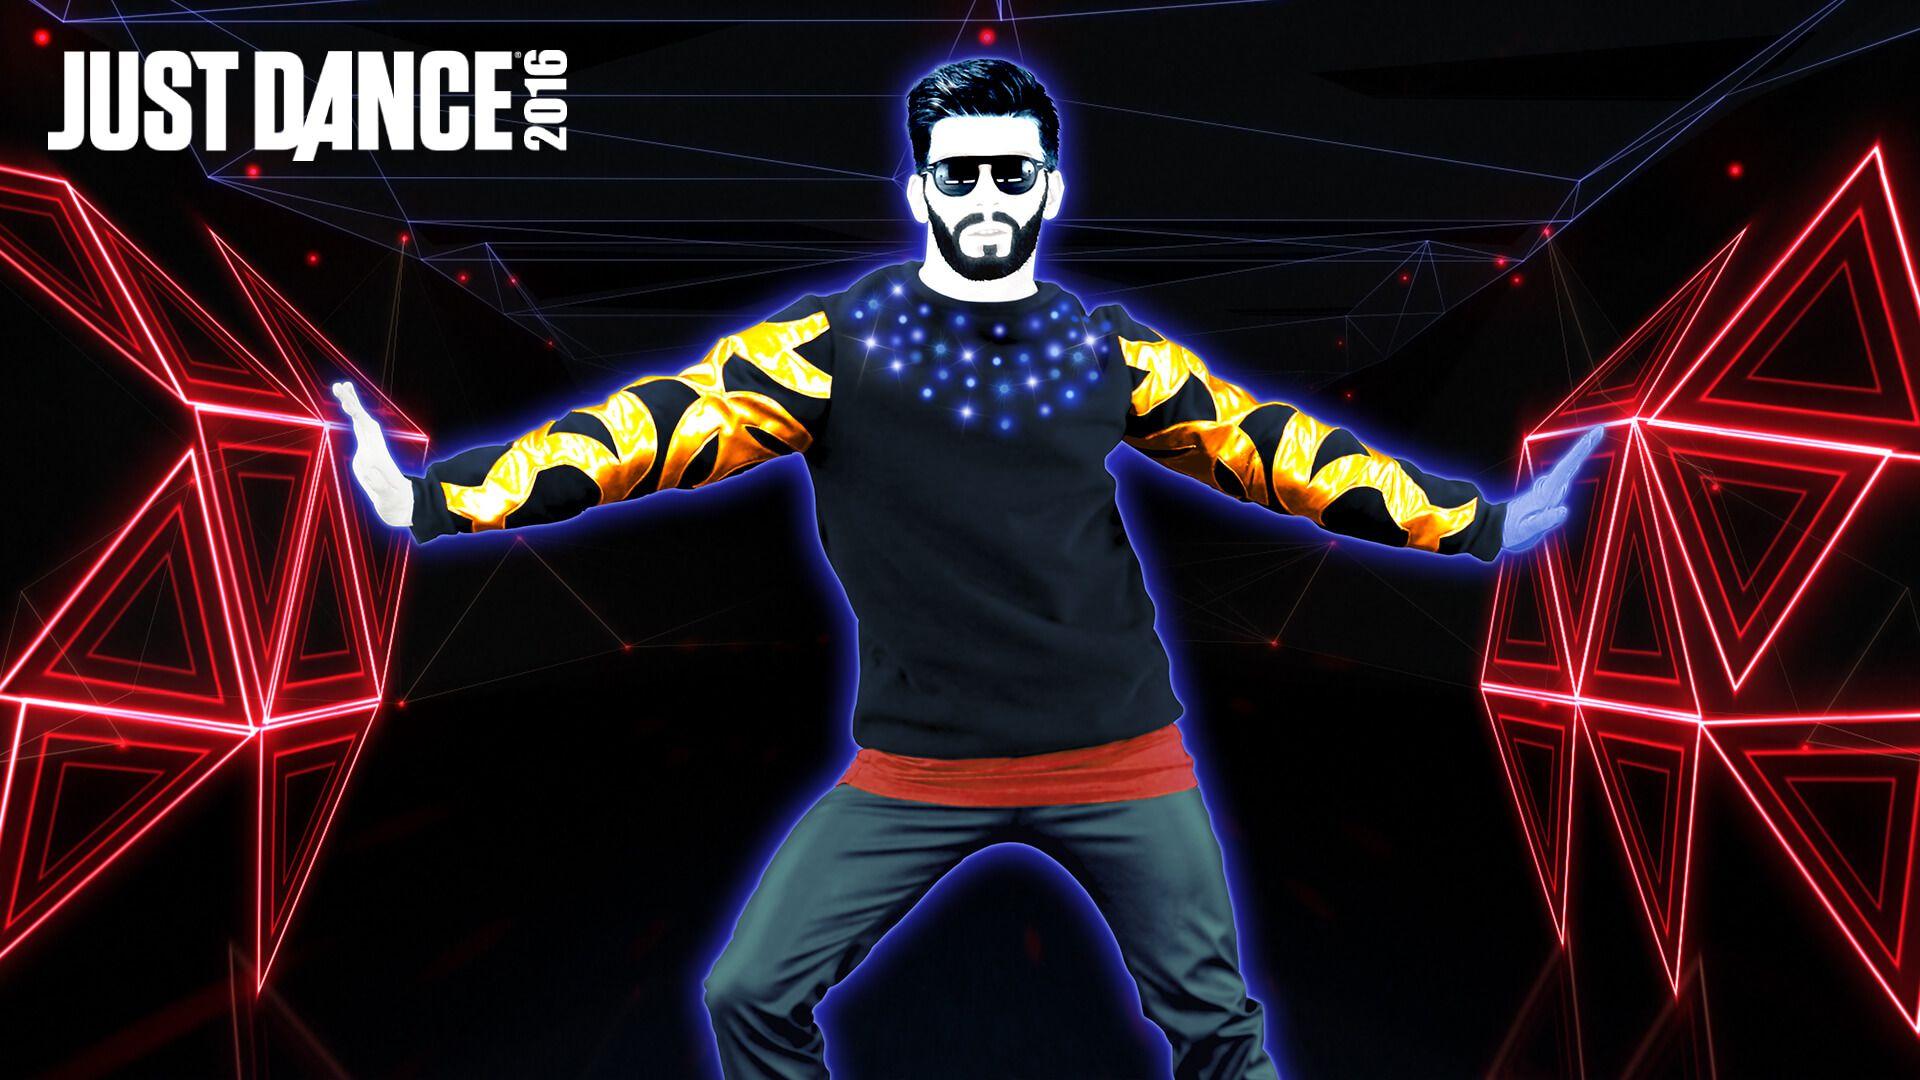 New Screens Released For Just Dance 2016